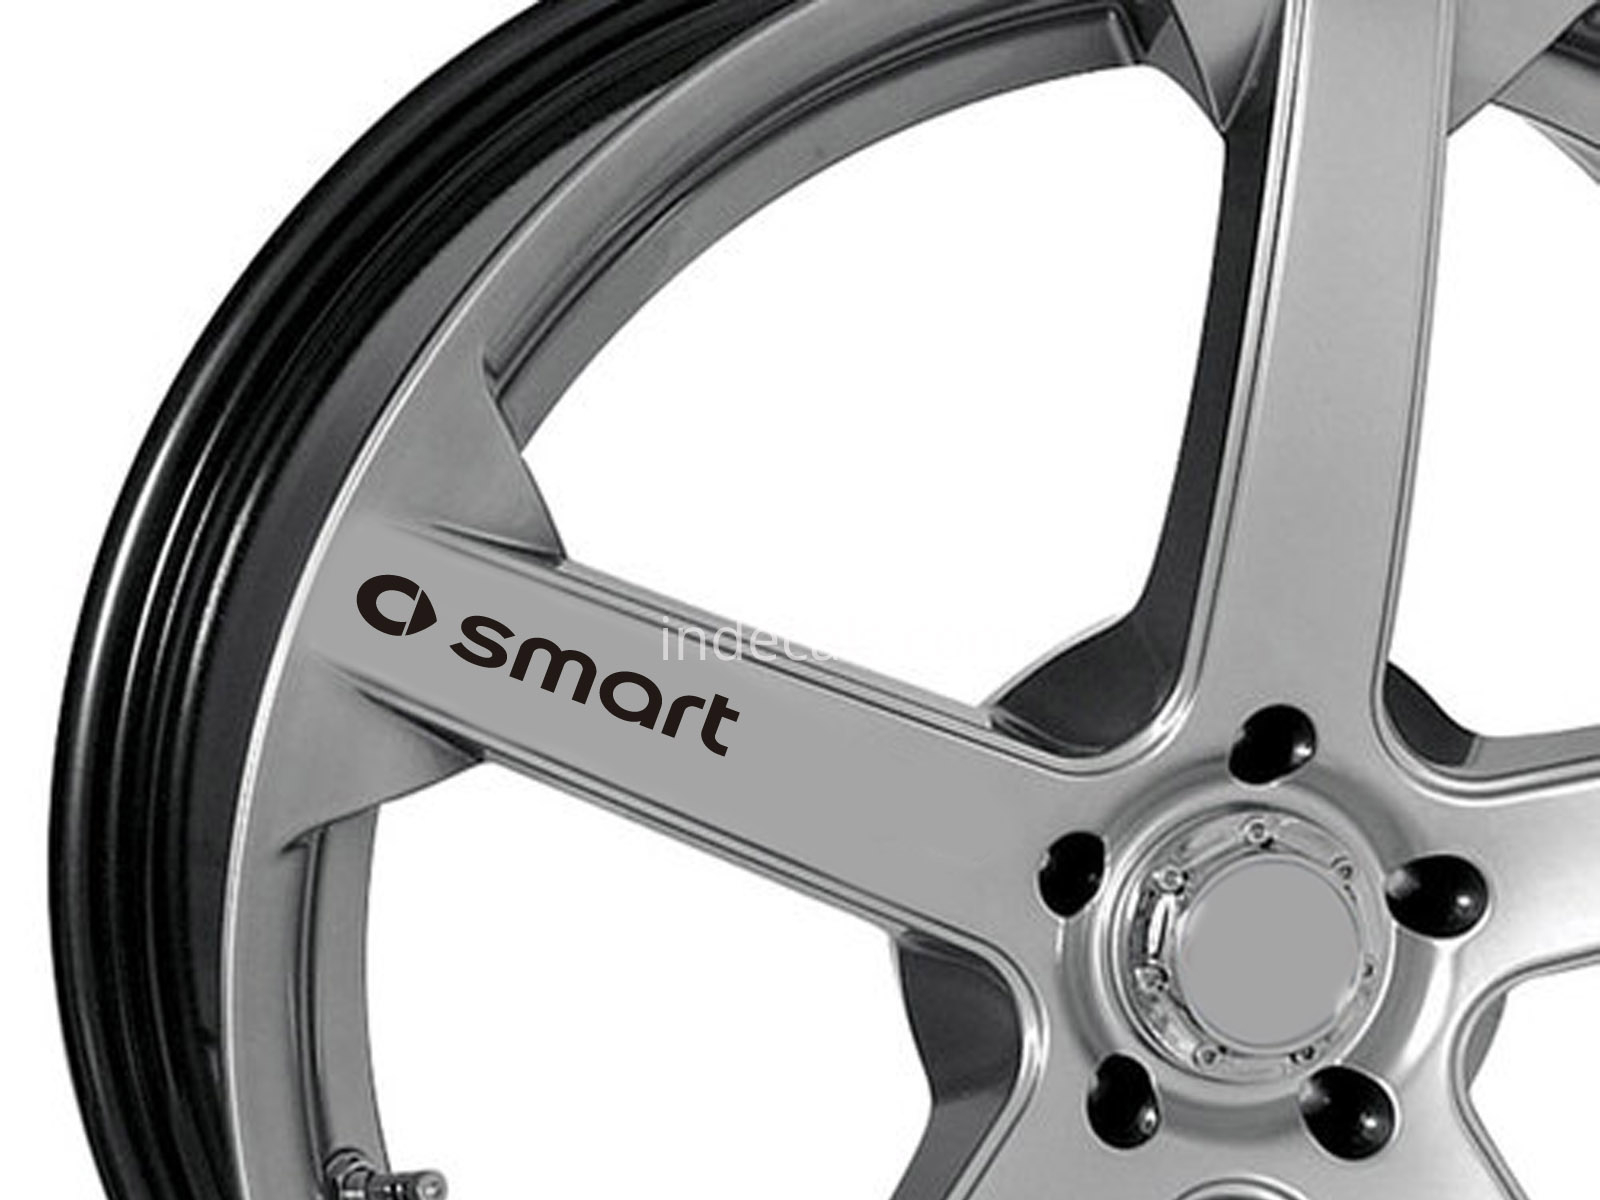 6 x Smart Stickers for Wheels - Black